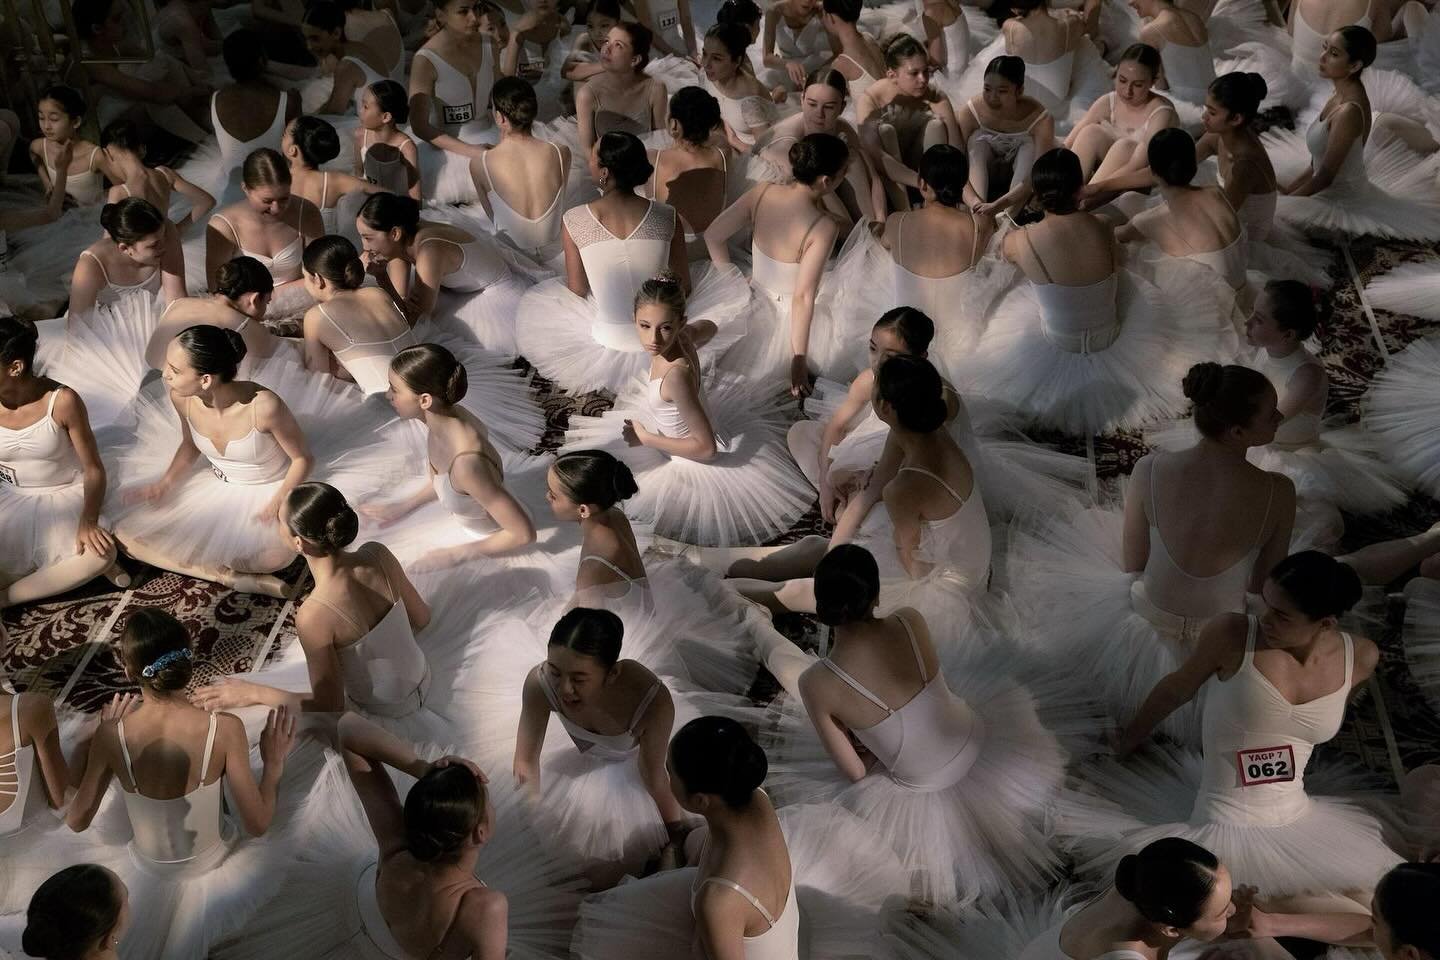 Dancers gather at the Plaza Hotel in New York before breaking the Guinness World Record for most ballerina dancers en pointe simultaneously. (Bess Adler/Gothamist)